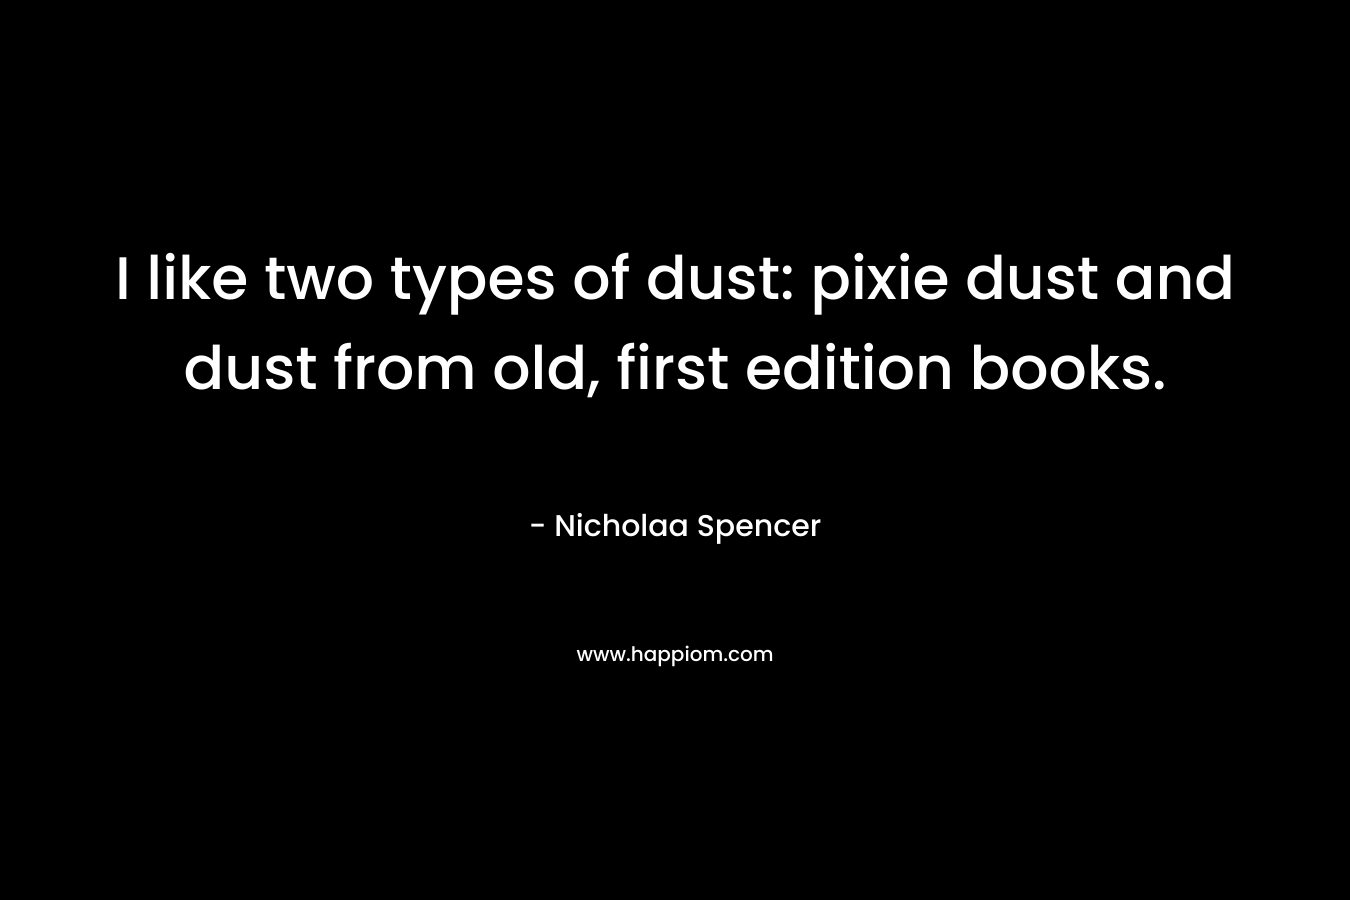 I like two types of dust: pixie dust and dust from old, first edition books.